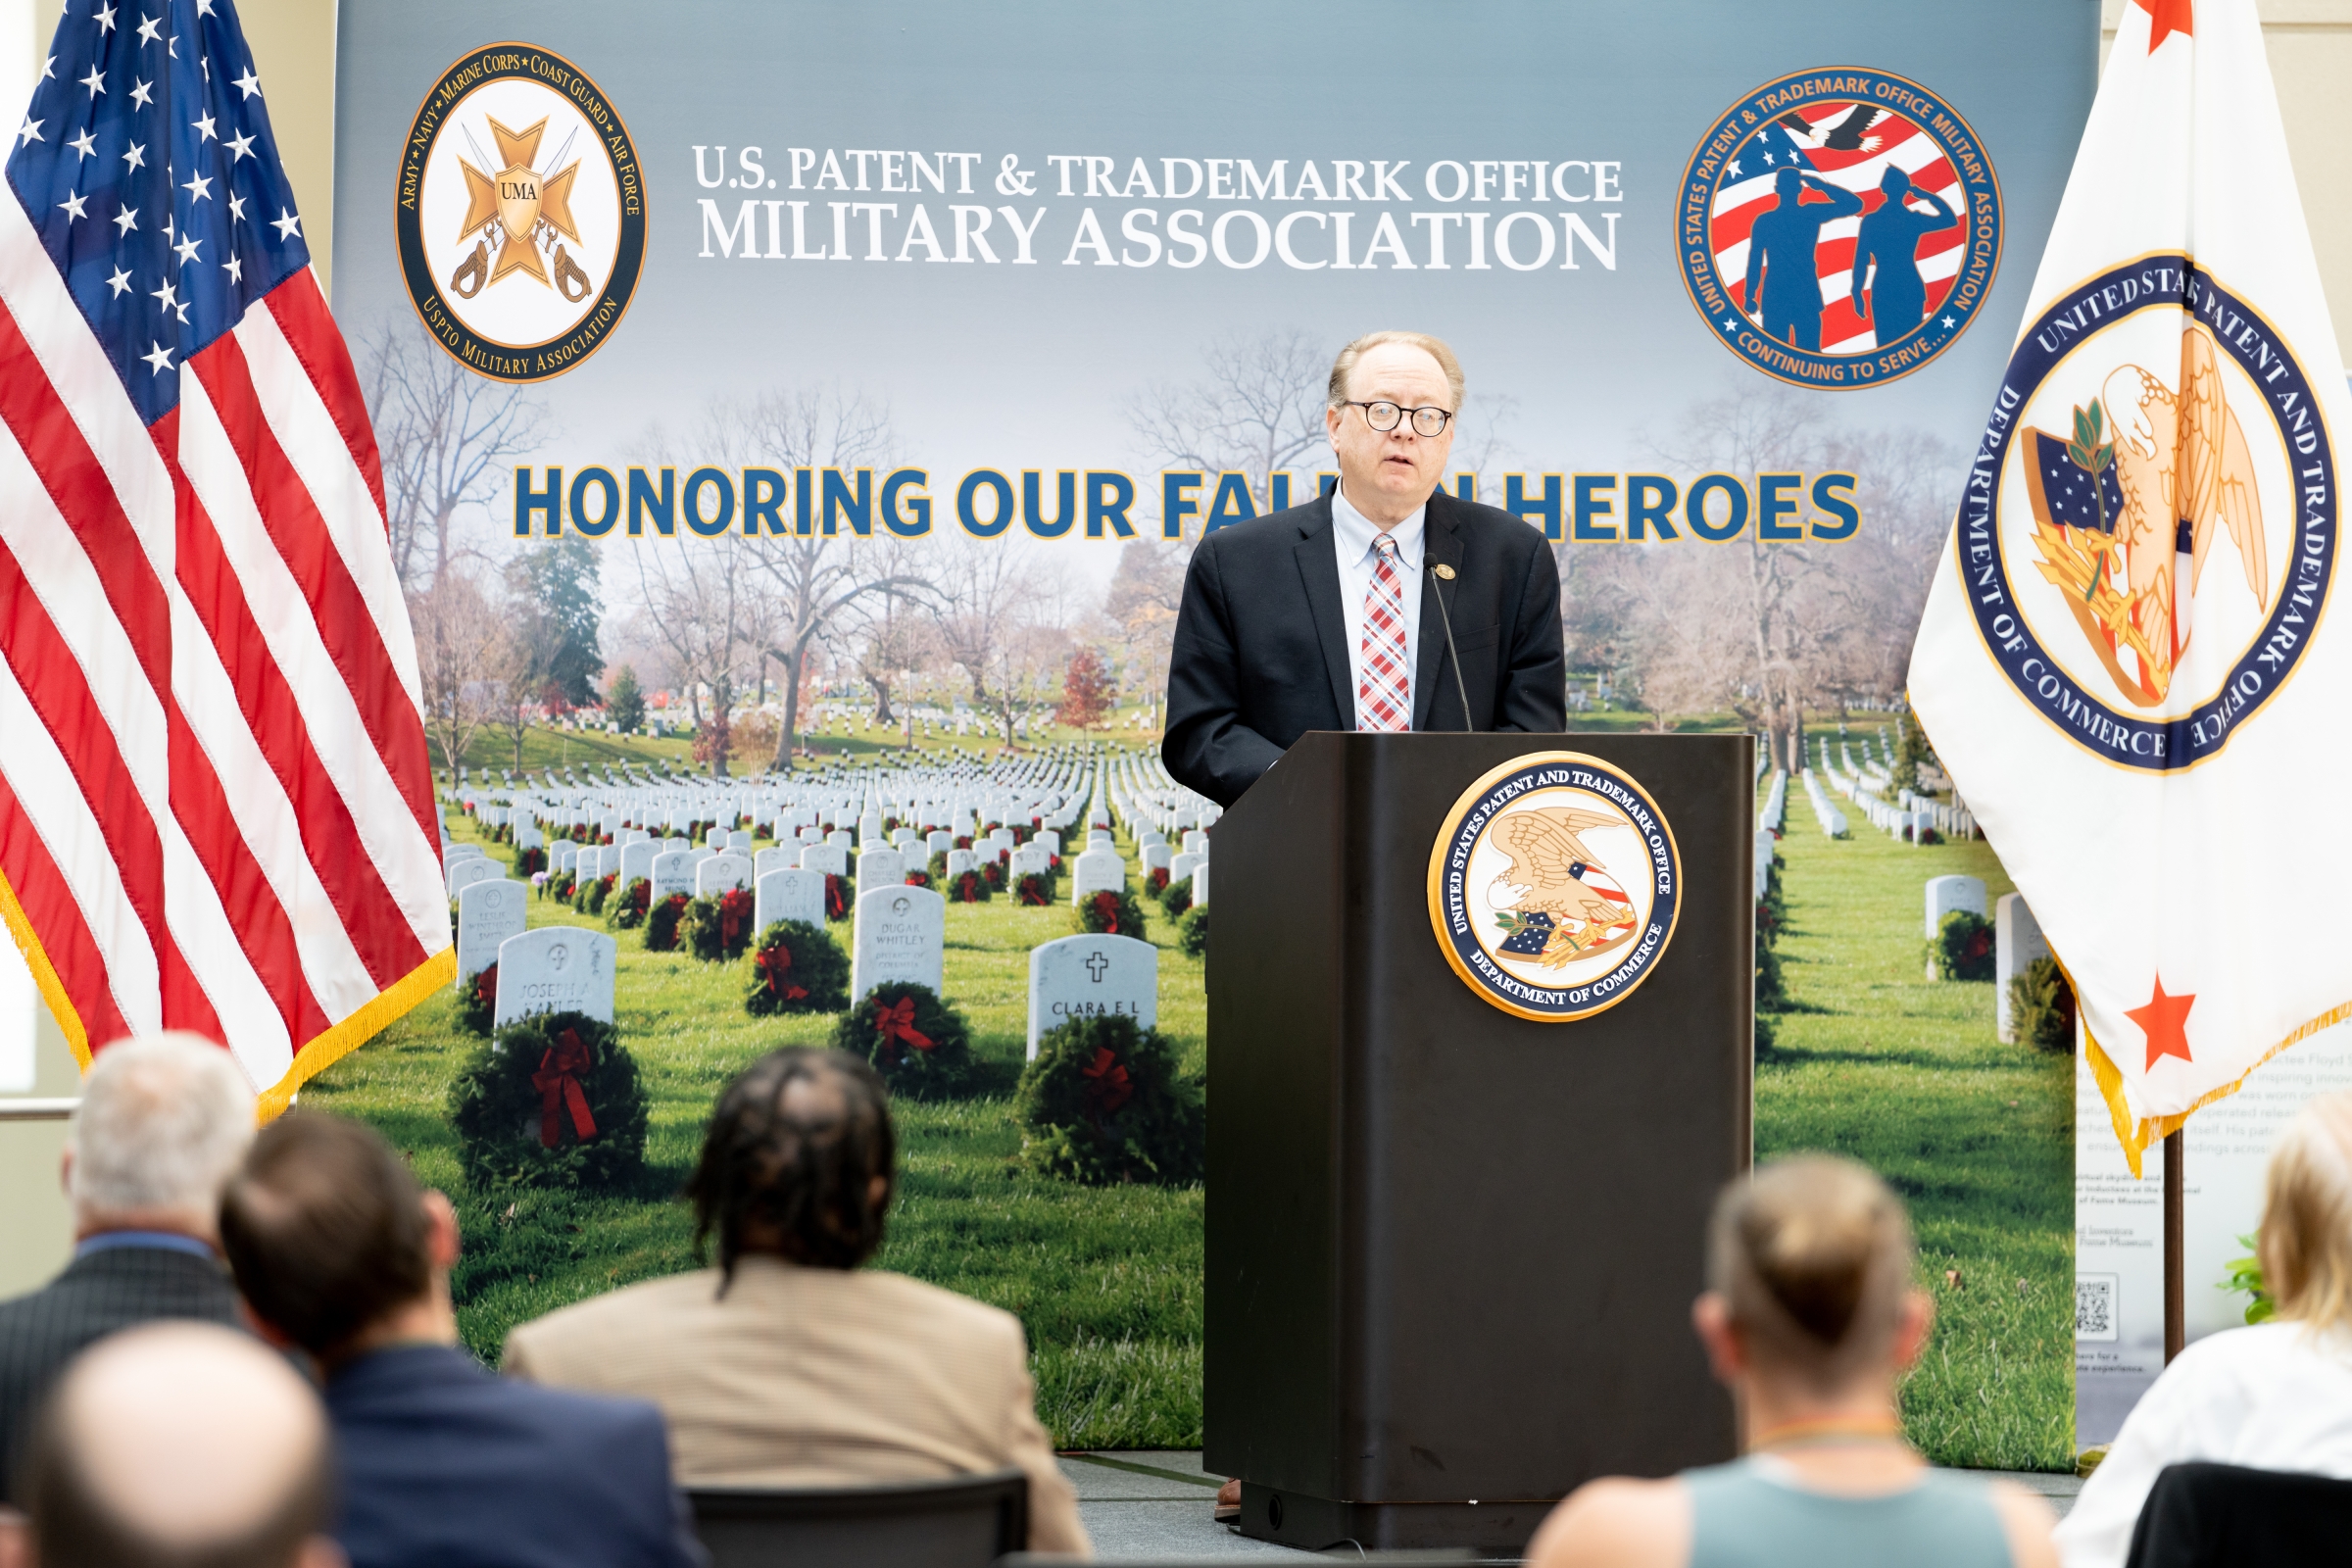 May 25, 2023 - USPTO Military Association (UMA) hosts Memorial Day Tribute and Walk of Remembrance